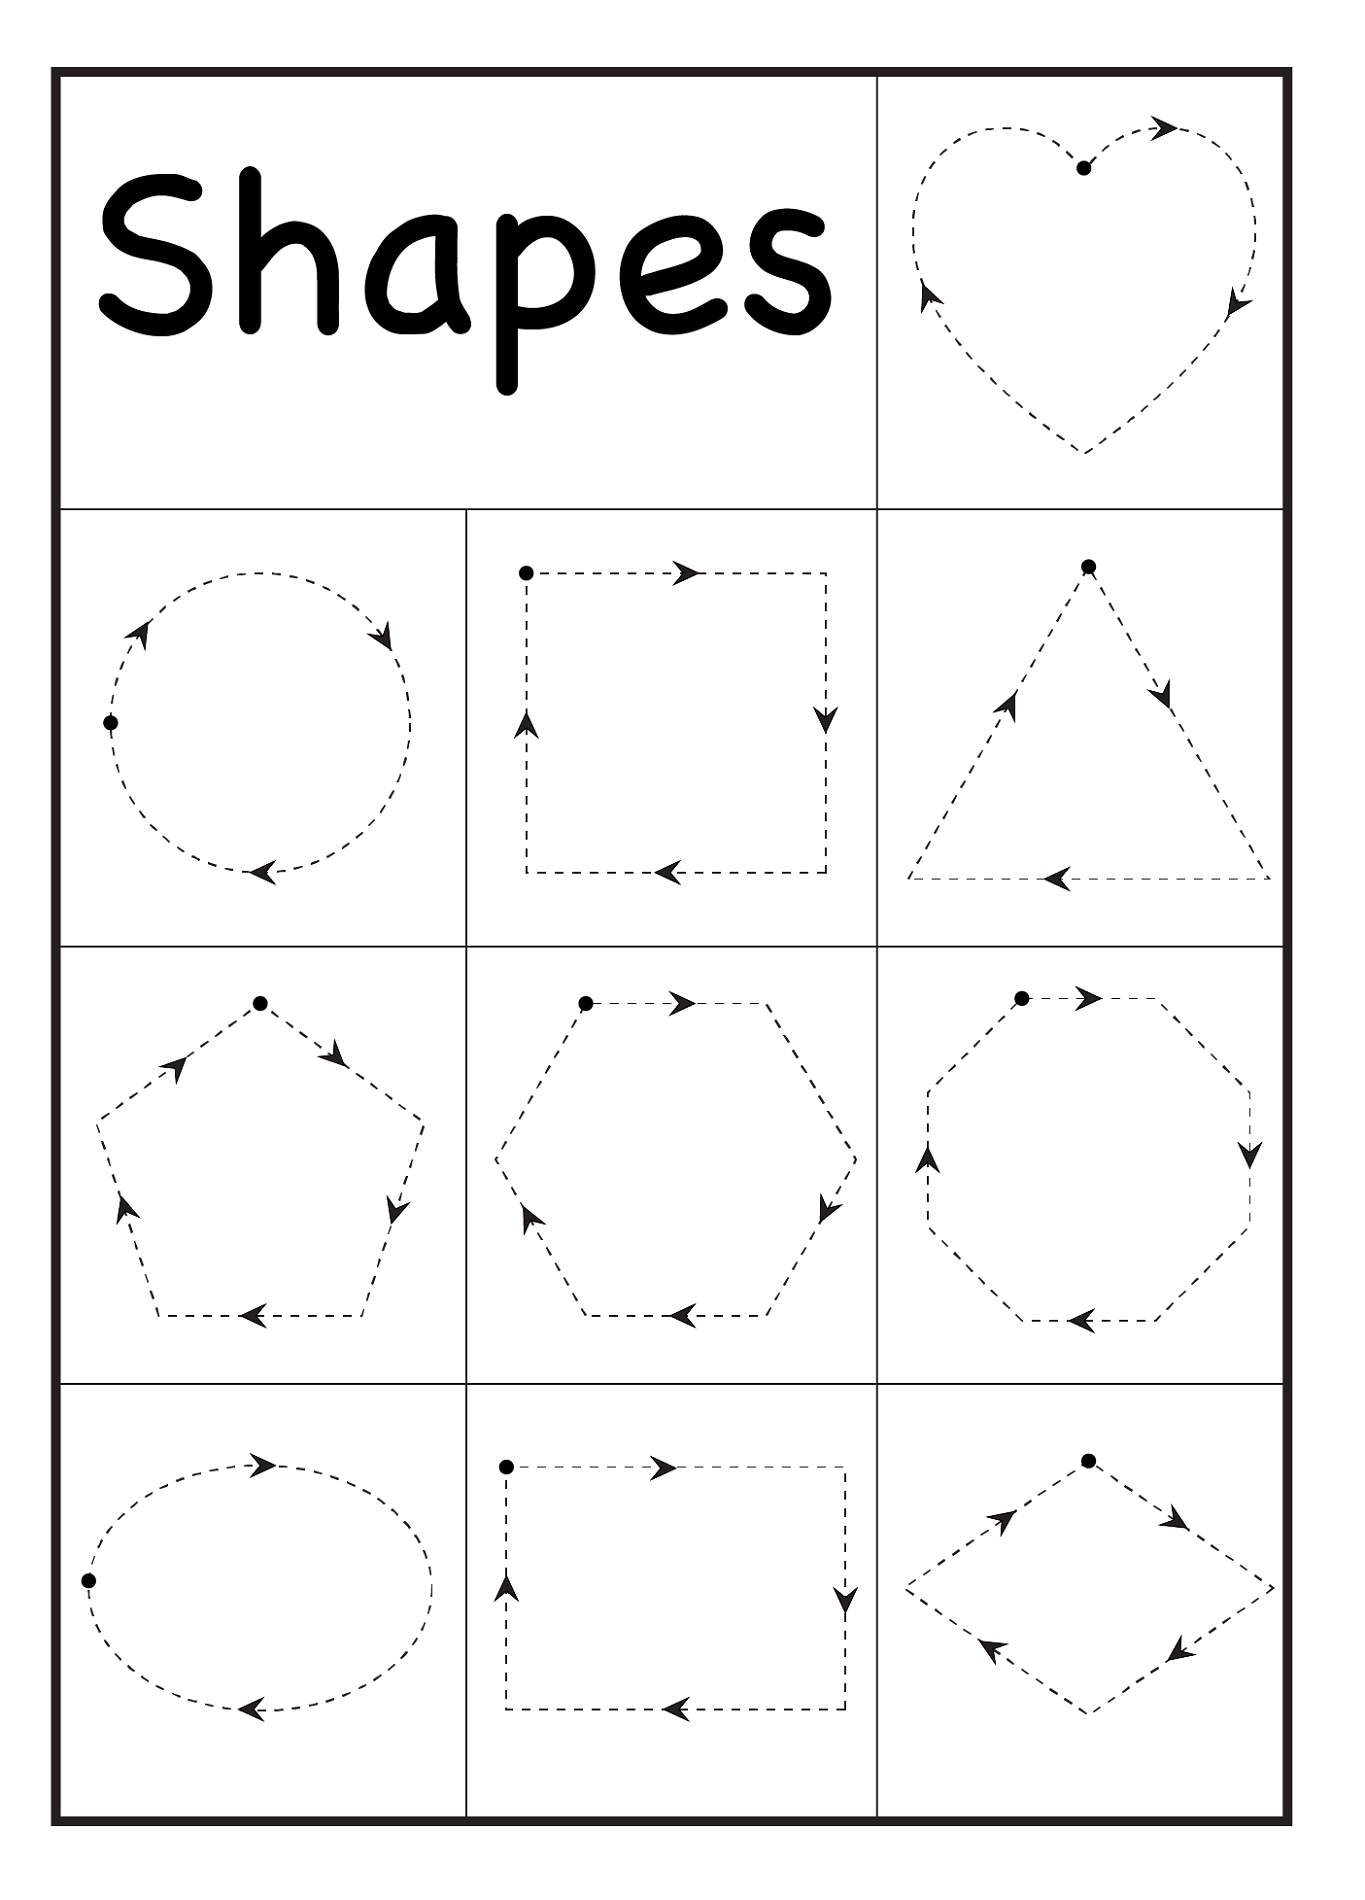 Worksheets for 2 Years Olds | Activity Shelter